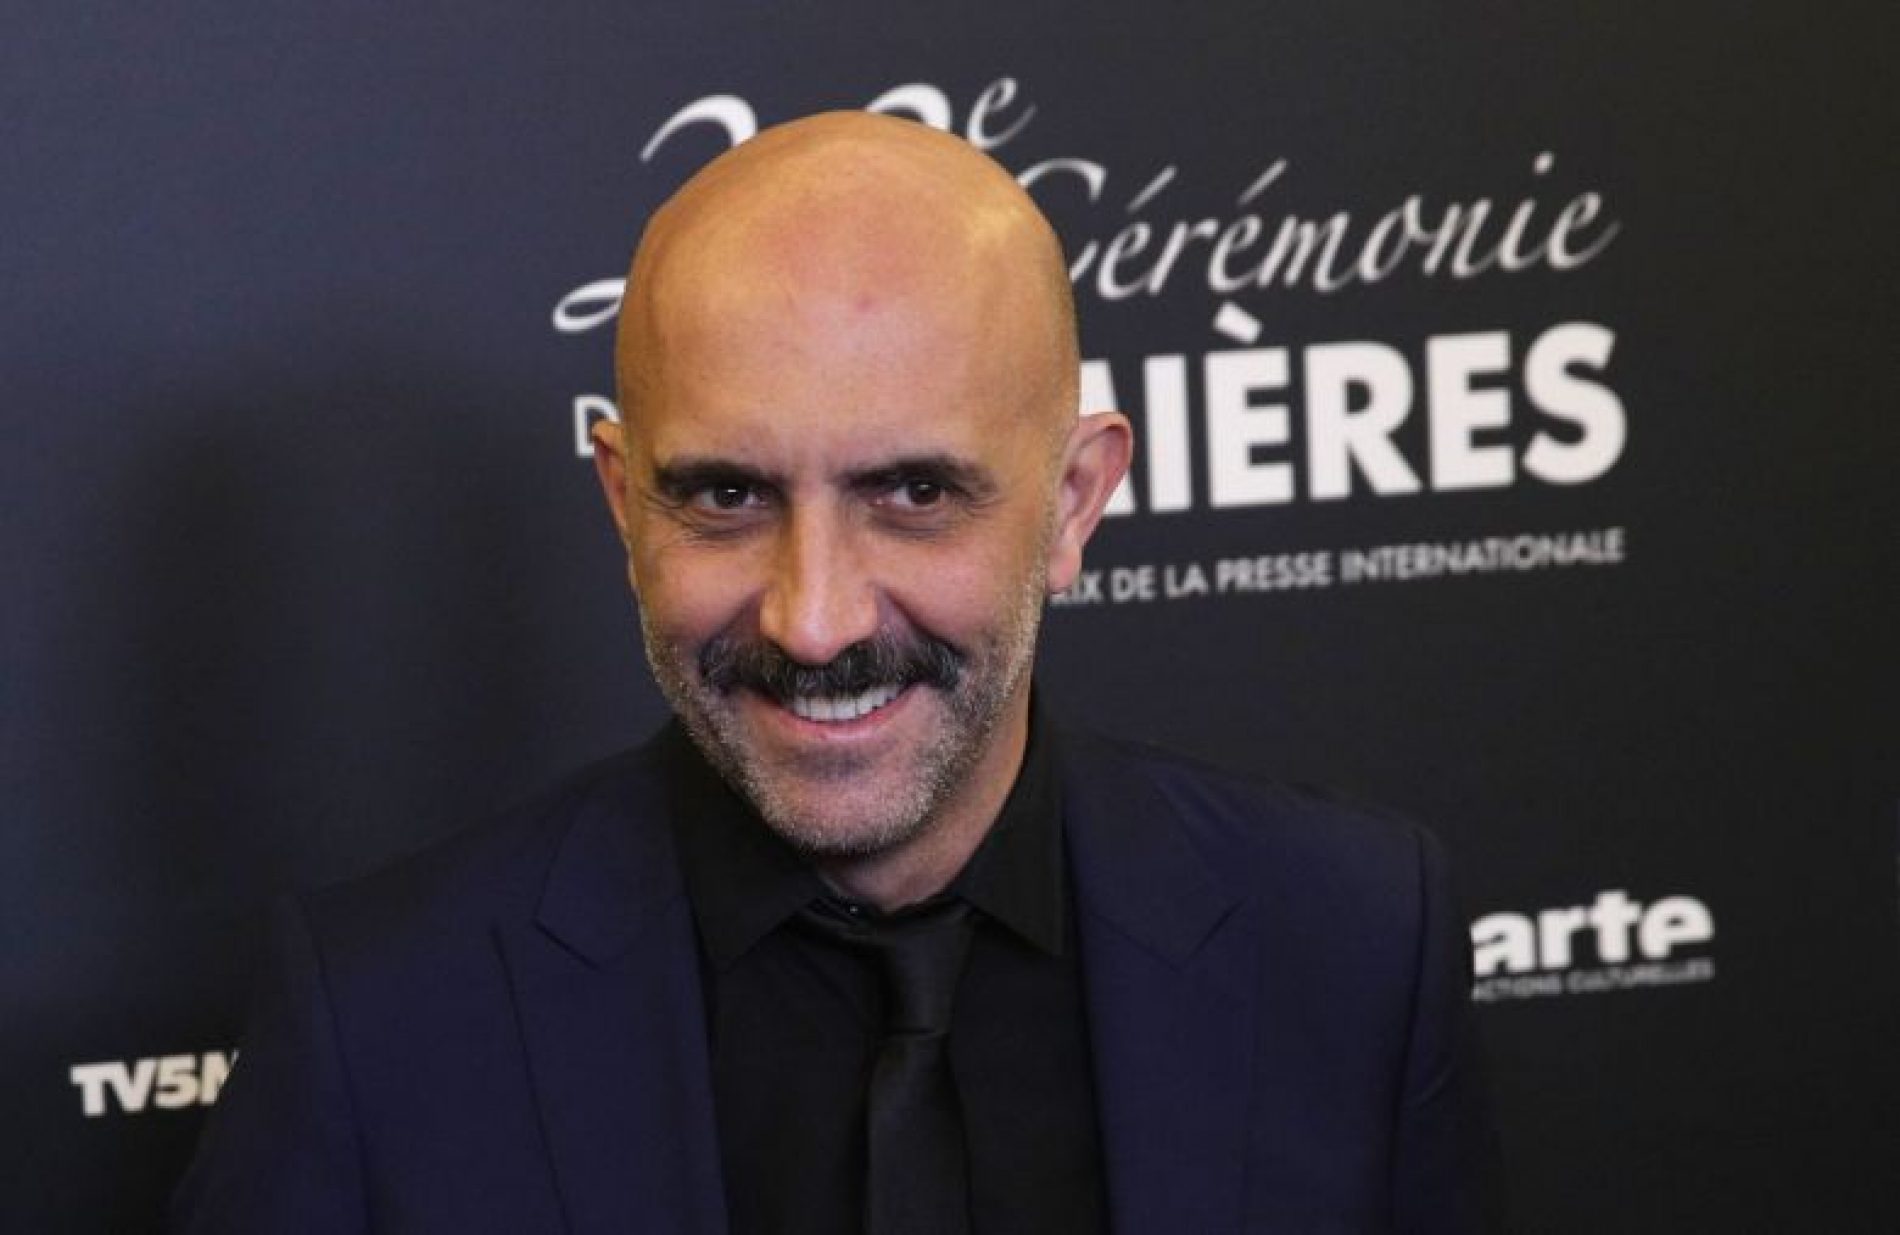 Filmmaker Gaspar Noé defends full frontal male nudity in films, says “It’s the source of life”